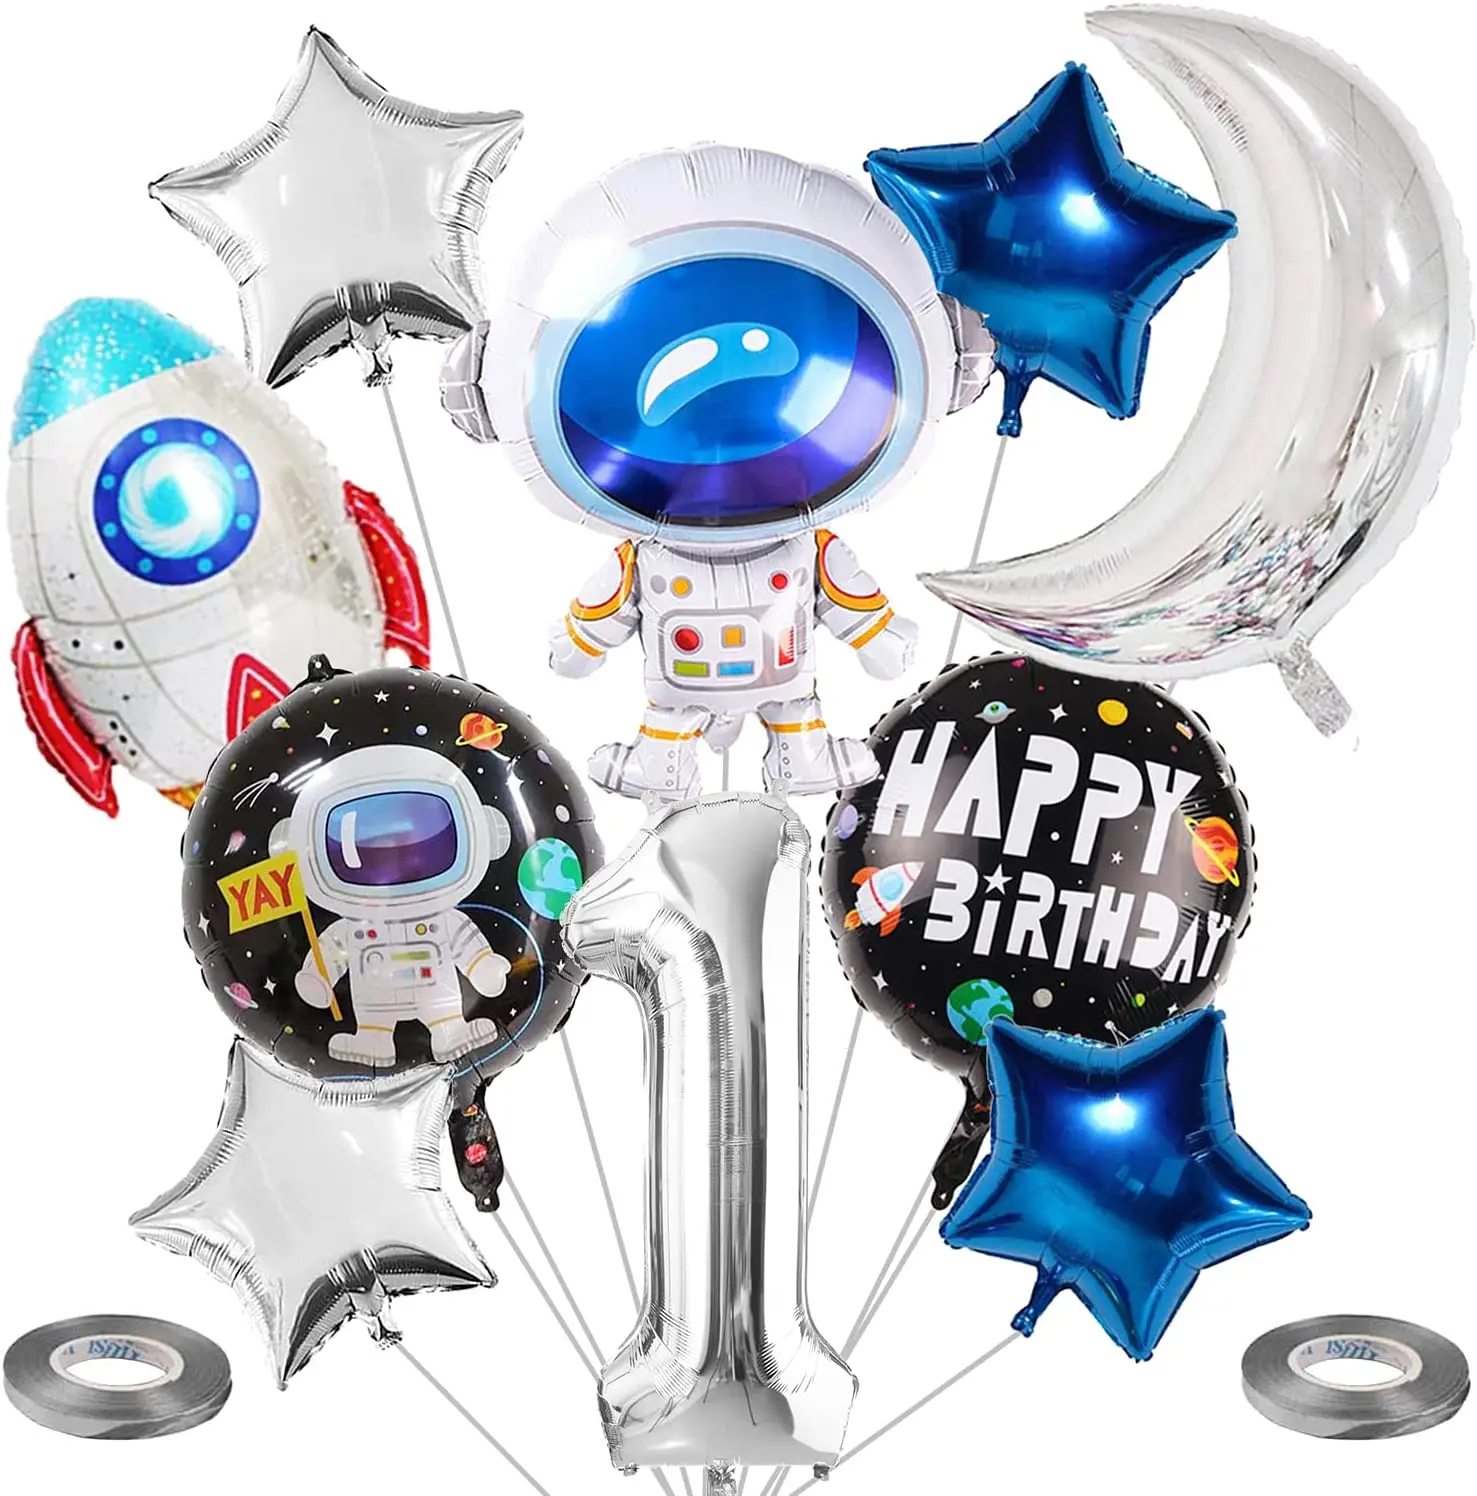 

10PCS Space Theme Number Balloons Decoration Astronaut Spaceman Rocket Balloons for Boy Space Galaxy Theme Birthday Party Decor